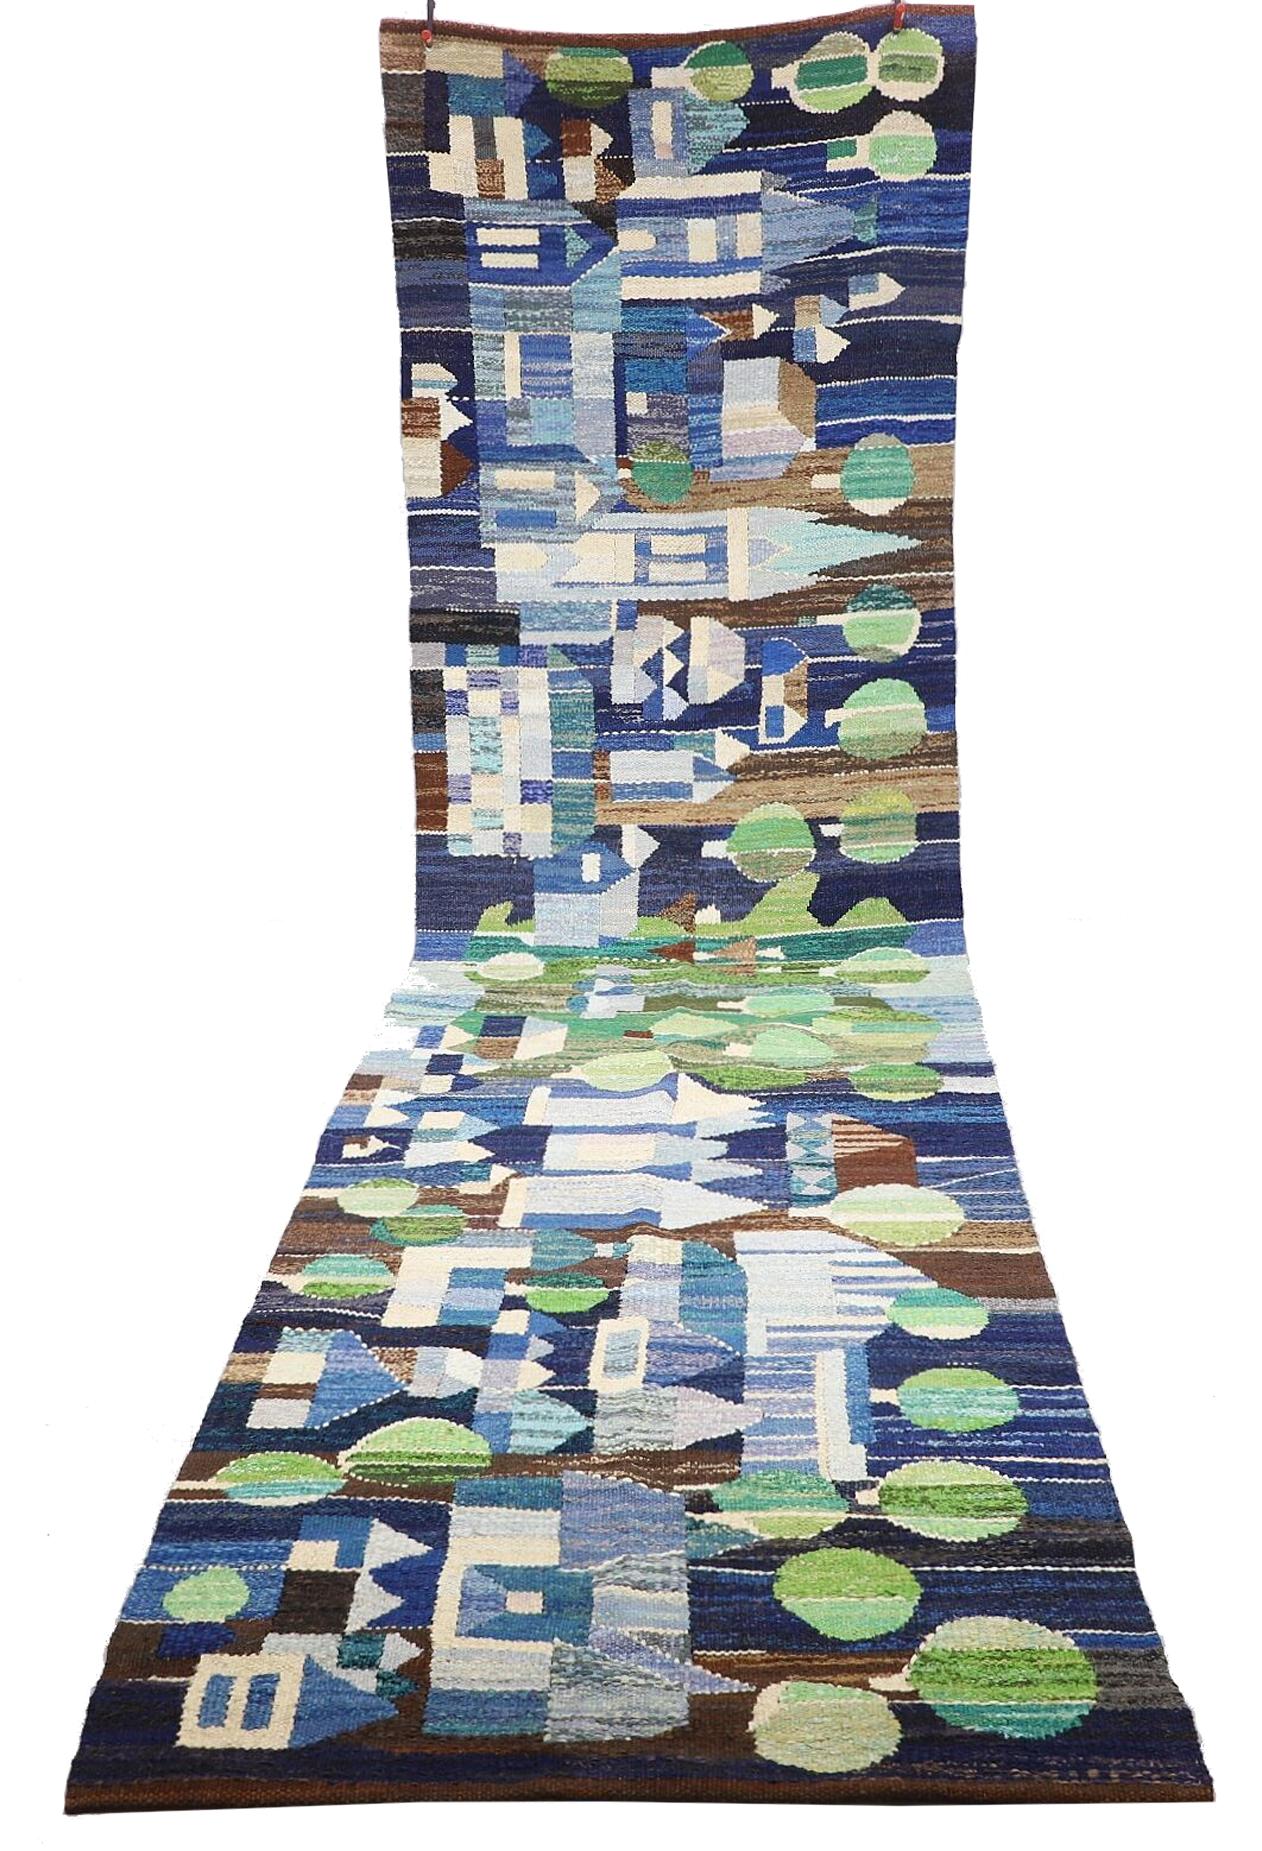 Scandinavian Modern Very Long Swedish Rug Depicting a Village in Shades of Blue, Green, and Brown For Sale